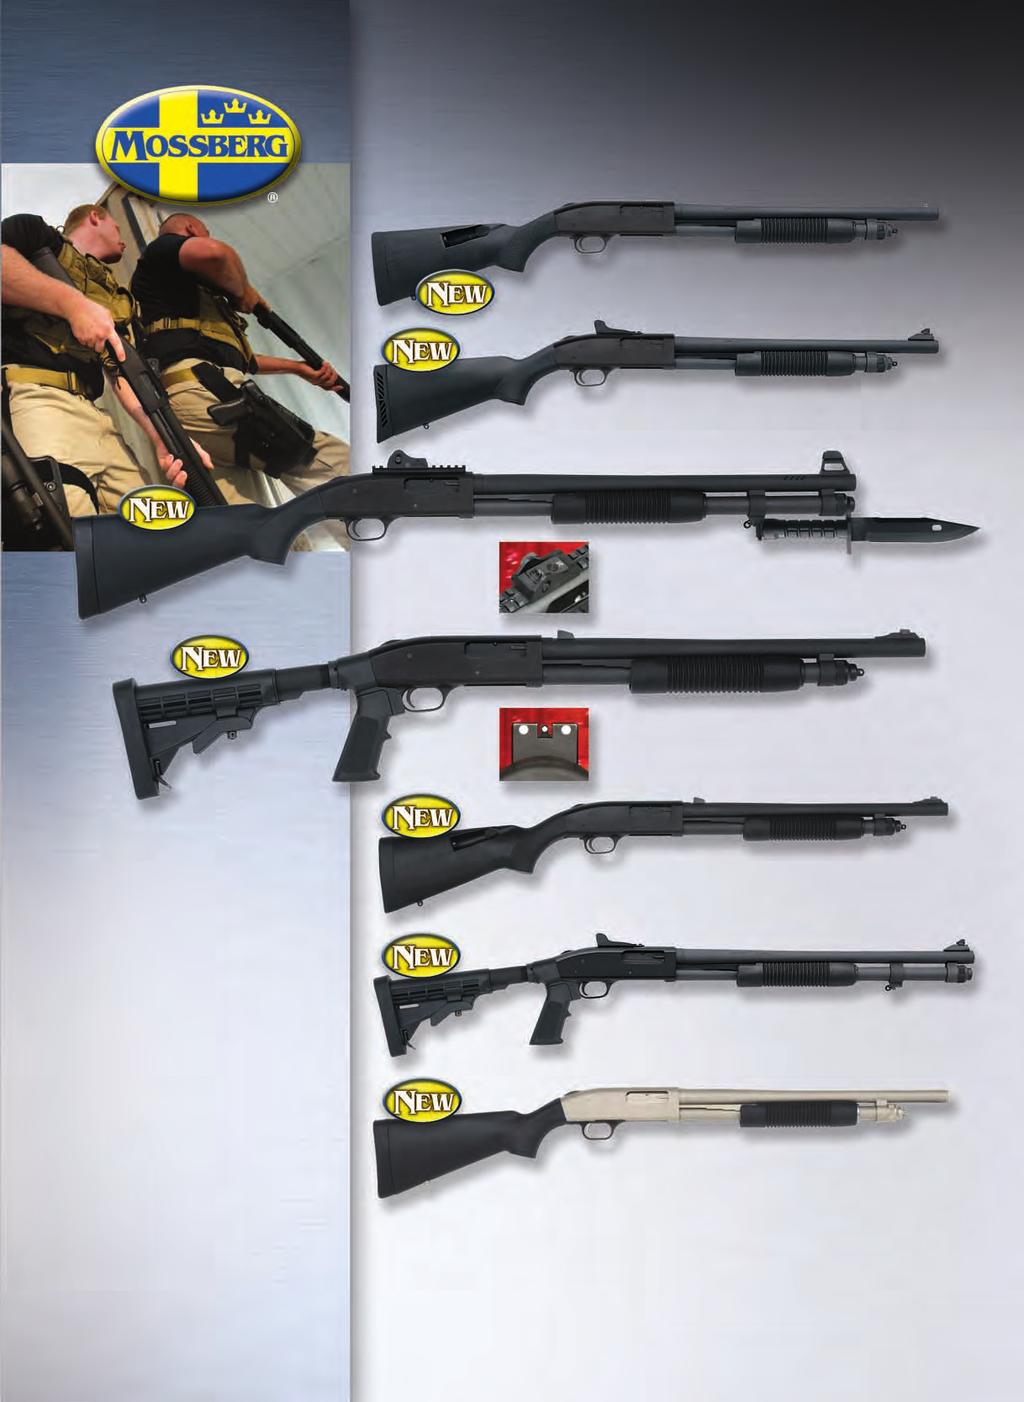 590A1 Special Purpose 13 SHOTGUN CONFIGURATIONS SEE PAGE 98 FOR PRODUCT SPECIFICATIONS 590A1 6 Shot 12 Gauge, 18.